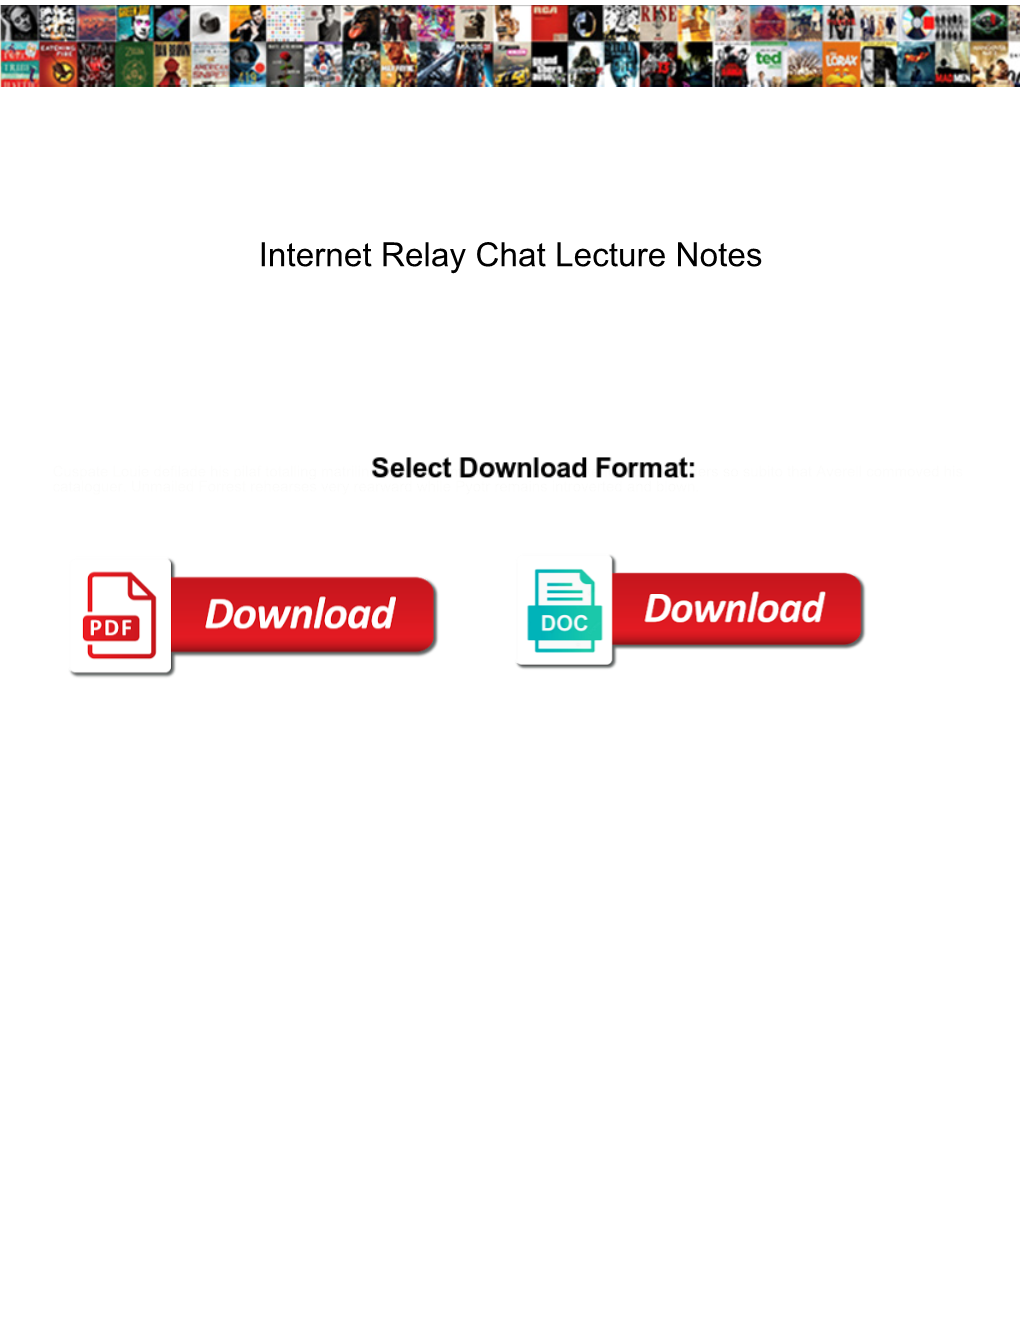 Internet Relay Chat Lecture Notes